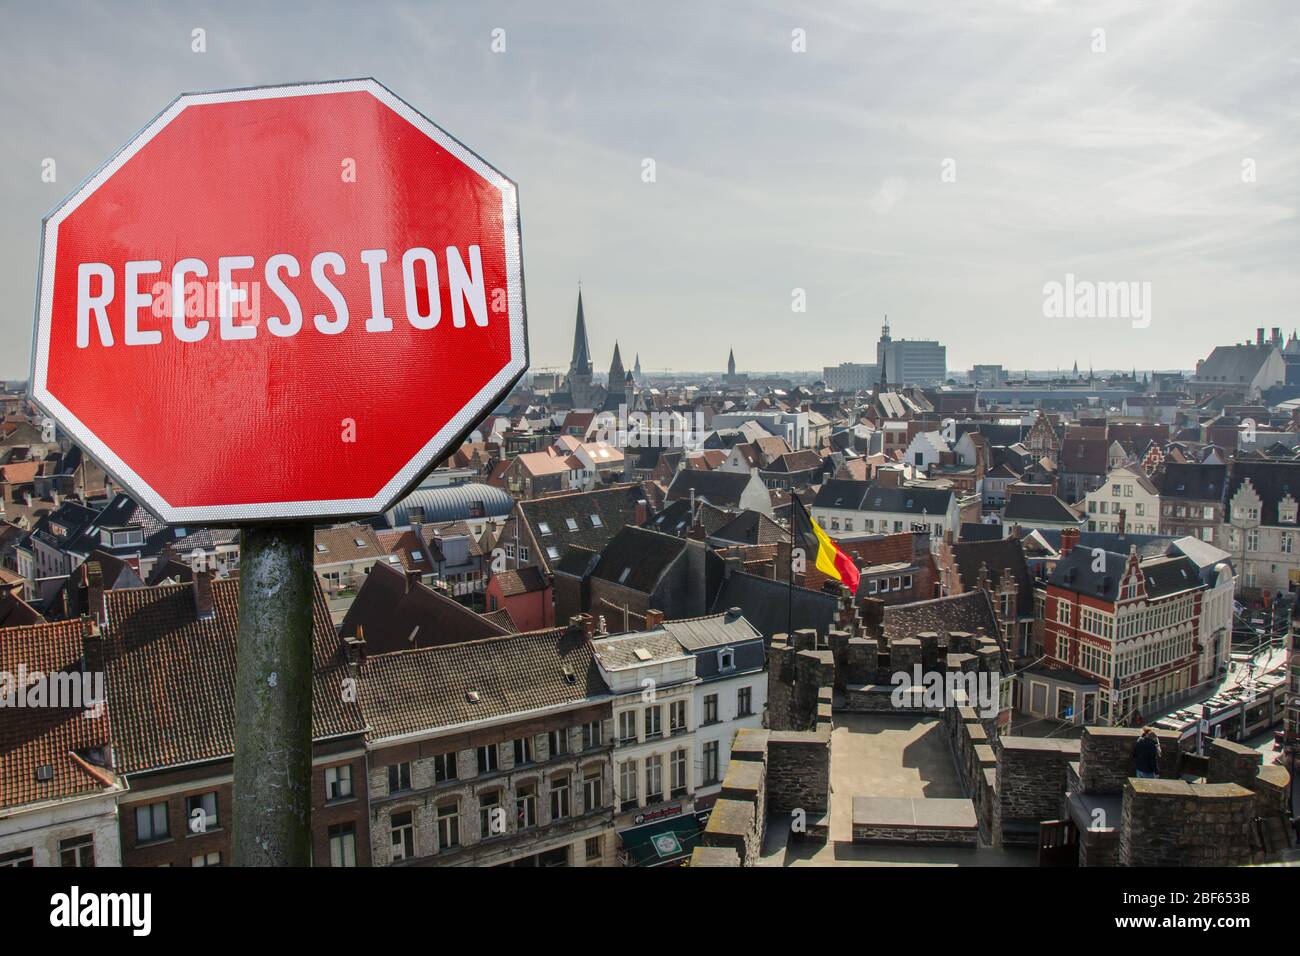 Recession stop sign with view of Brussels in Belgium. Financial crash in world economy because of coronavirus pandemic. Global economic crisis Stock Photo